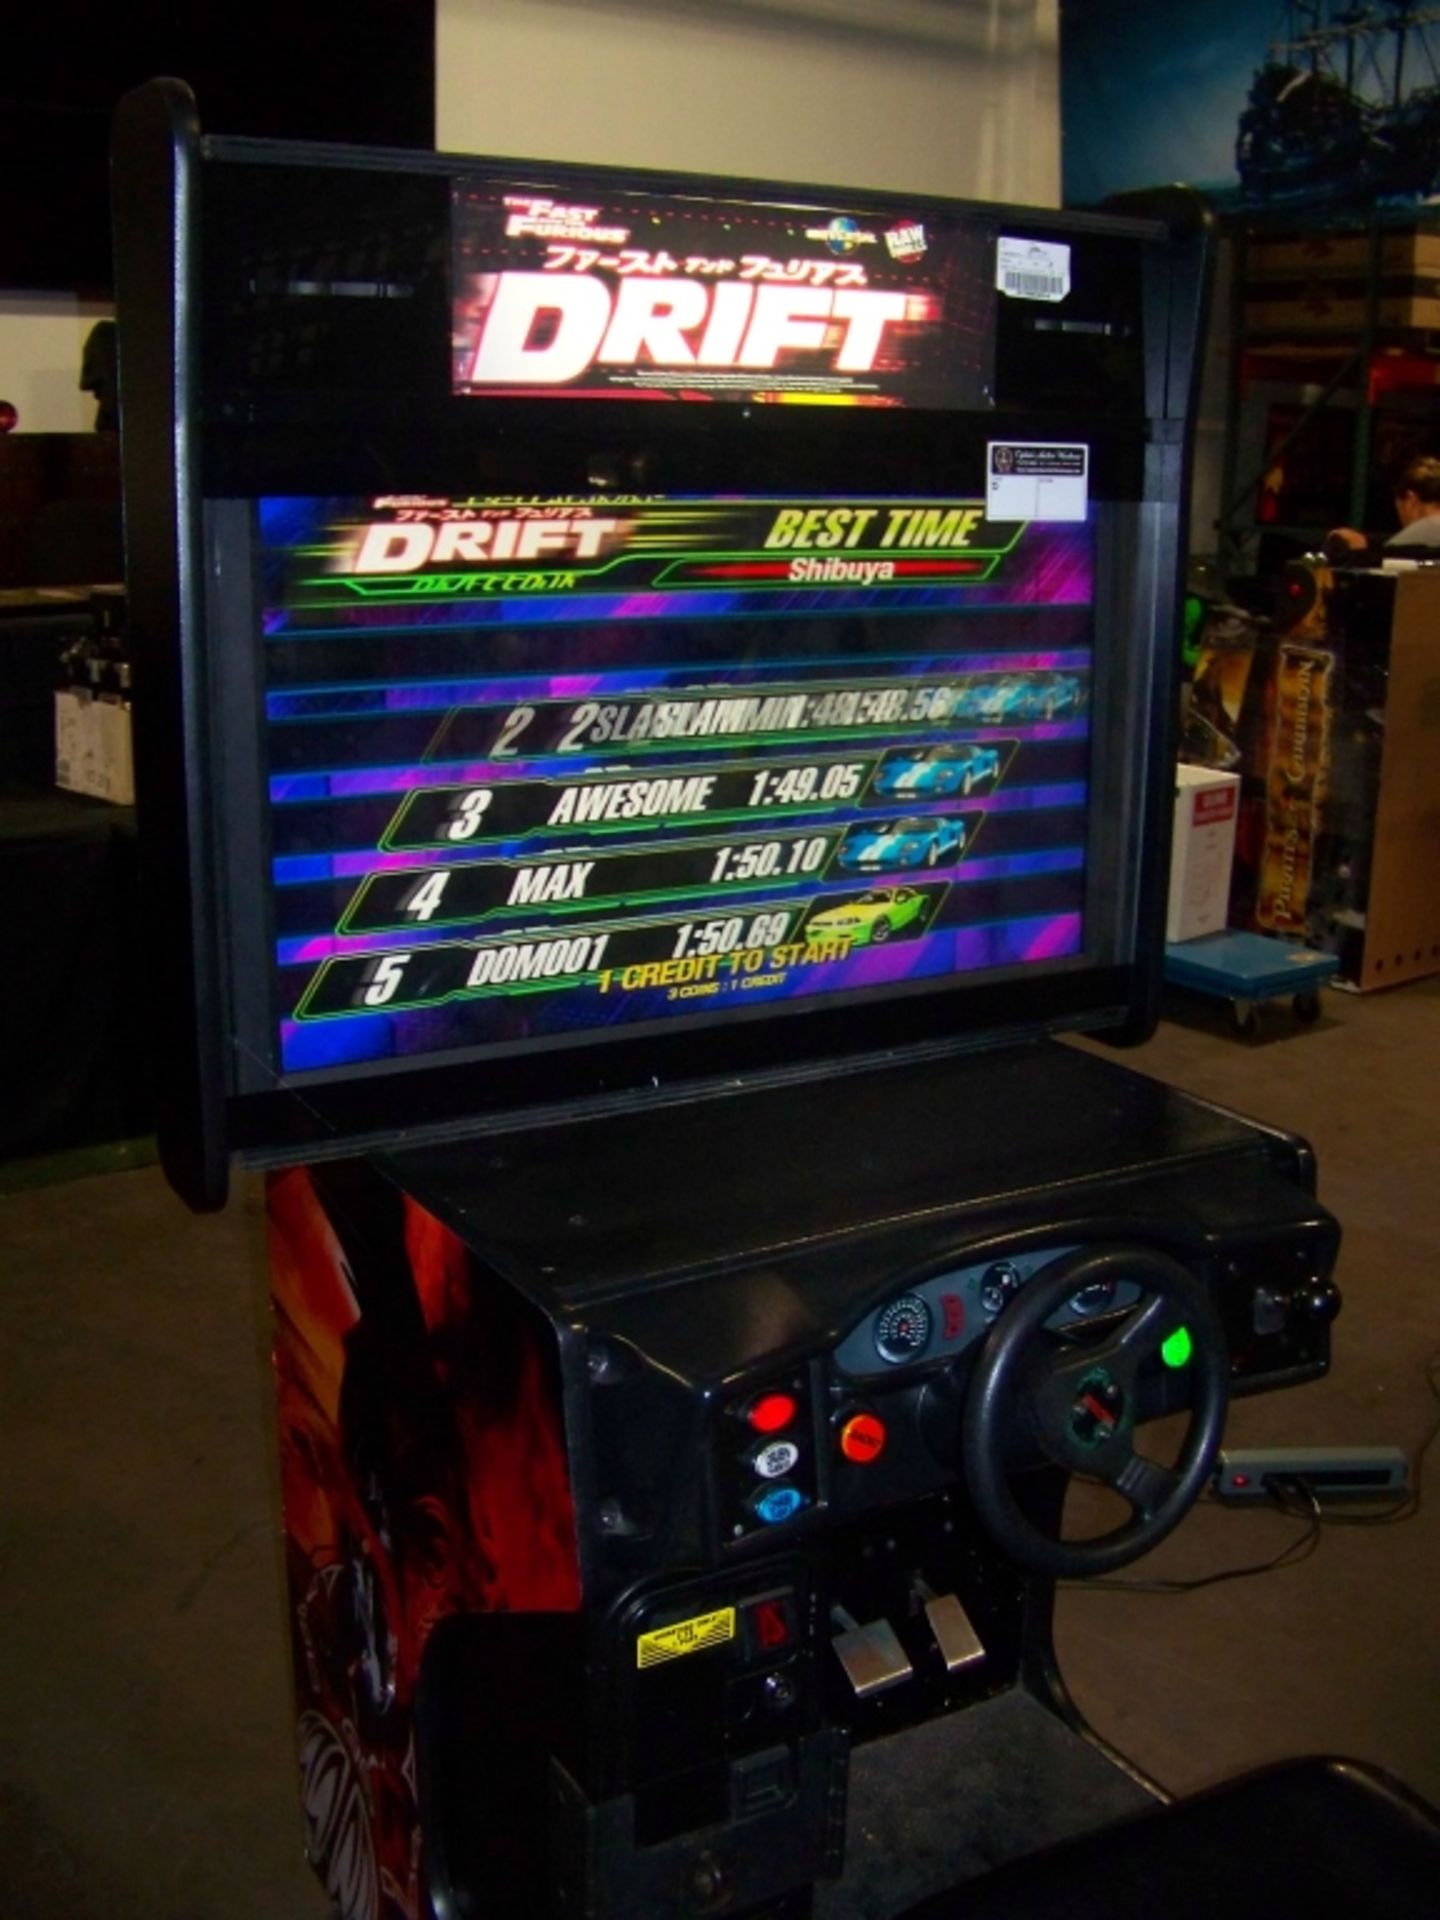 DRIFT FAST & FURIOUS DX 42" LCD RACING ARCADE GAME - Image 3 of 6